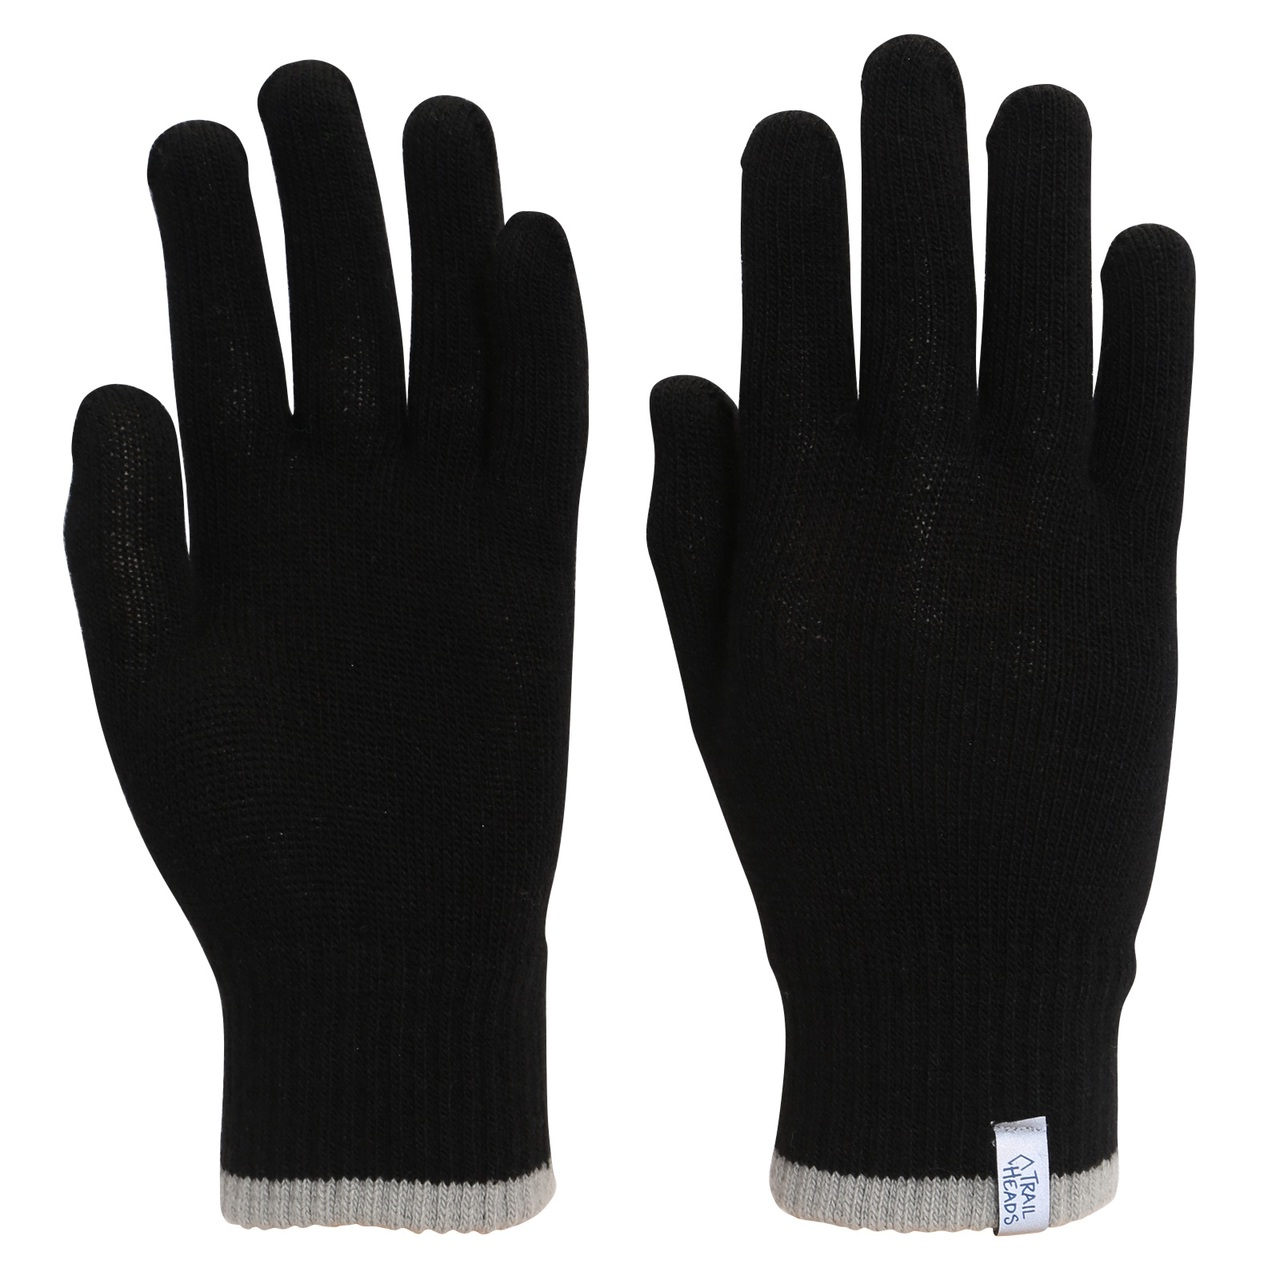 Do it Men's Large Lined Jersey Work Glove with Knit Wrist